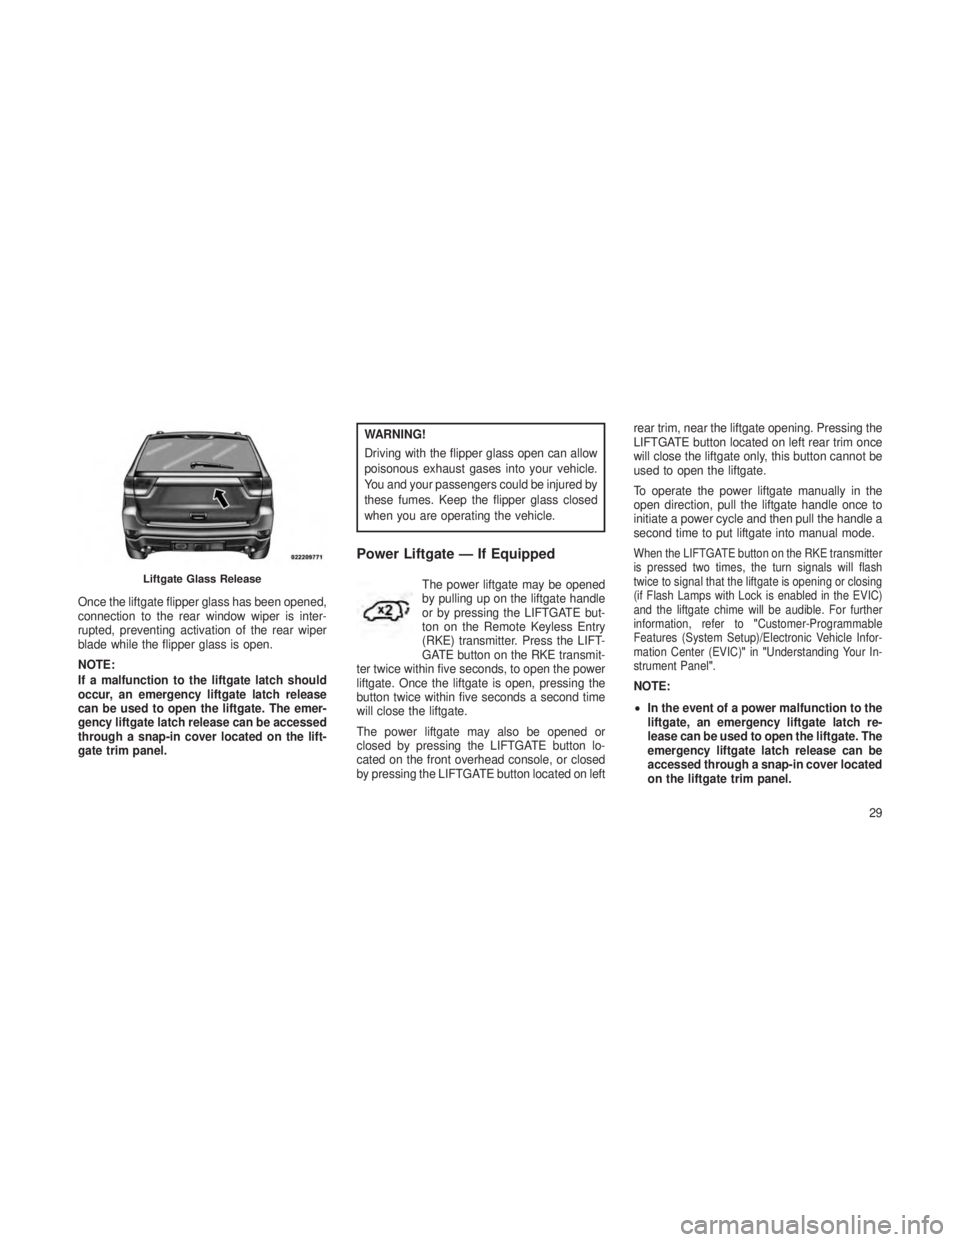 JEEP GRAND CHEROKEE 2013  Owner handbook (in English) Once the liftgate flipper glass has been opened,
connection to the rear window wiper is inter-
rupted, preventing activation of the rear wiper
blade while the flipper glass is open.
NOTE:
If a malfunc